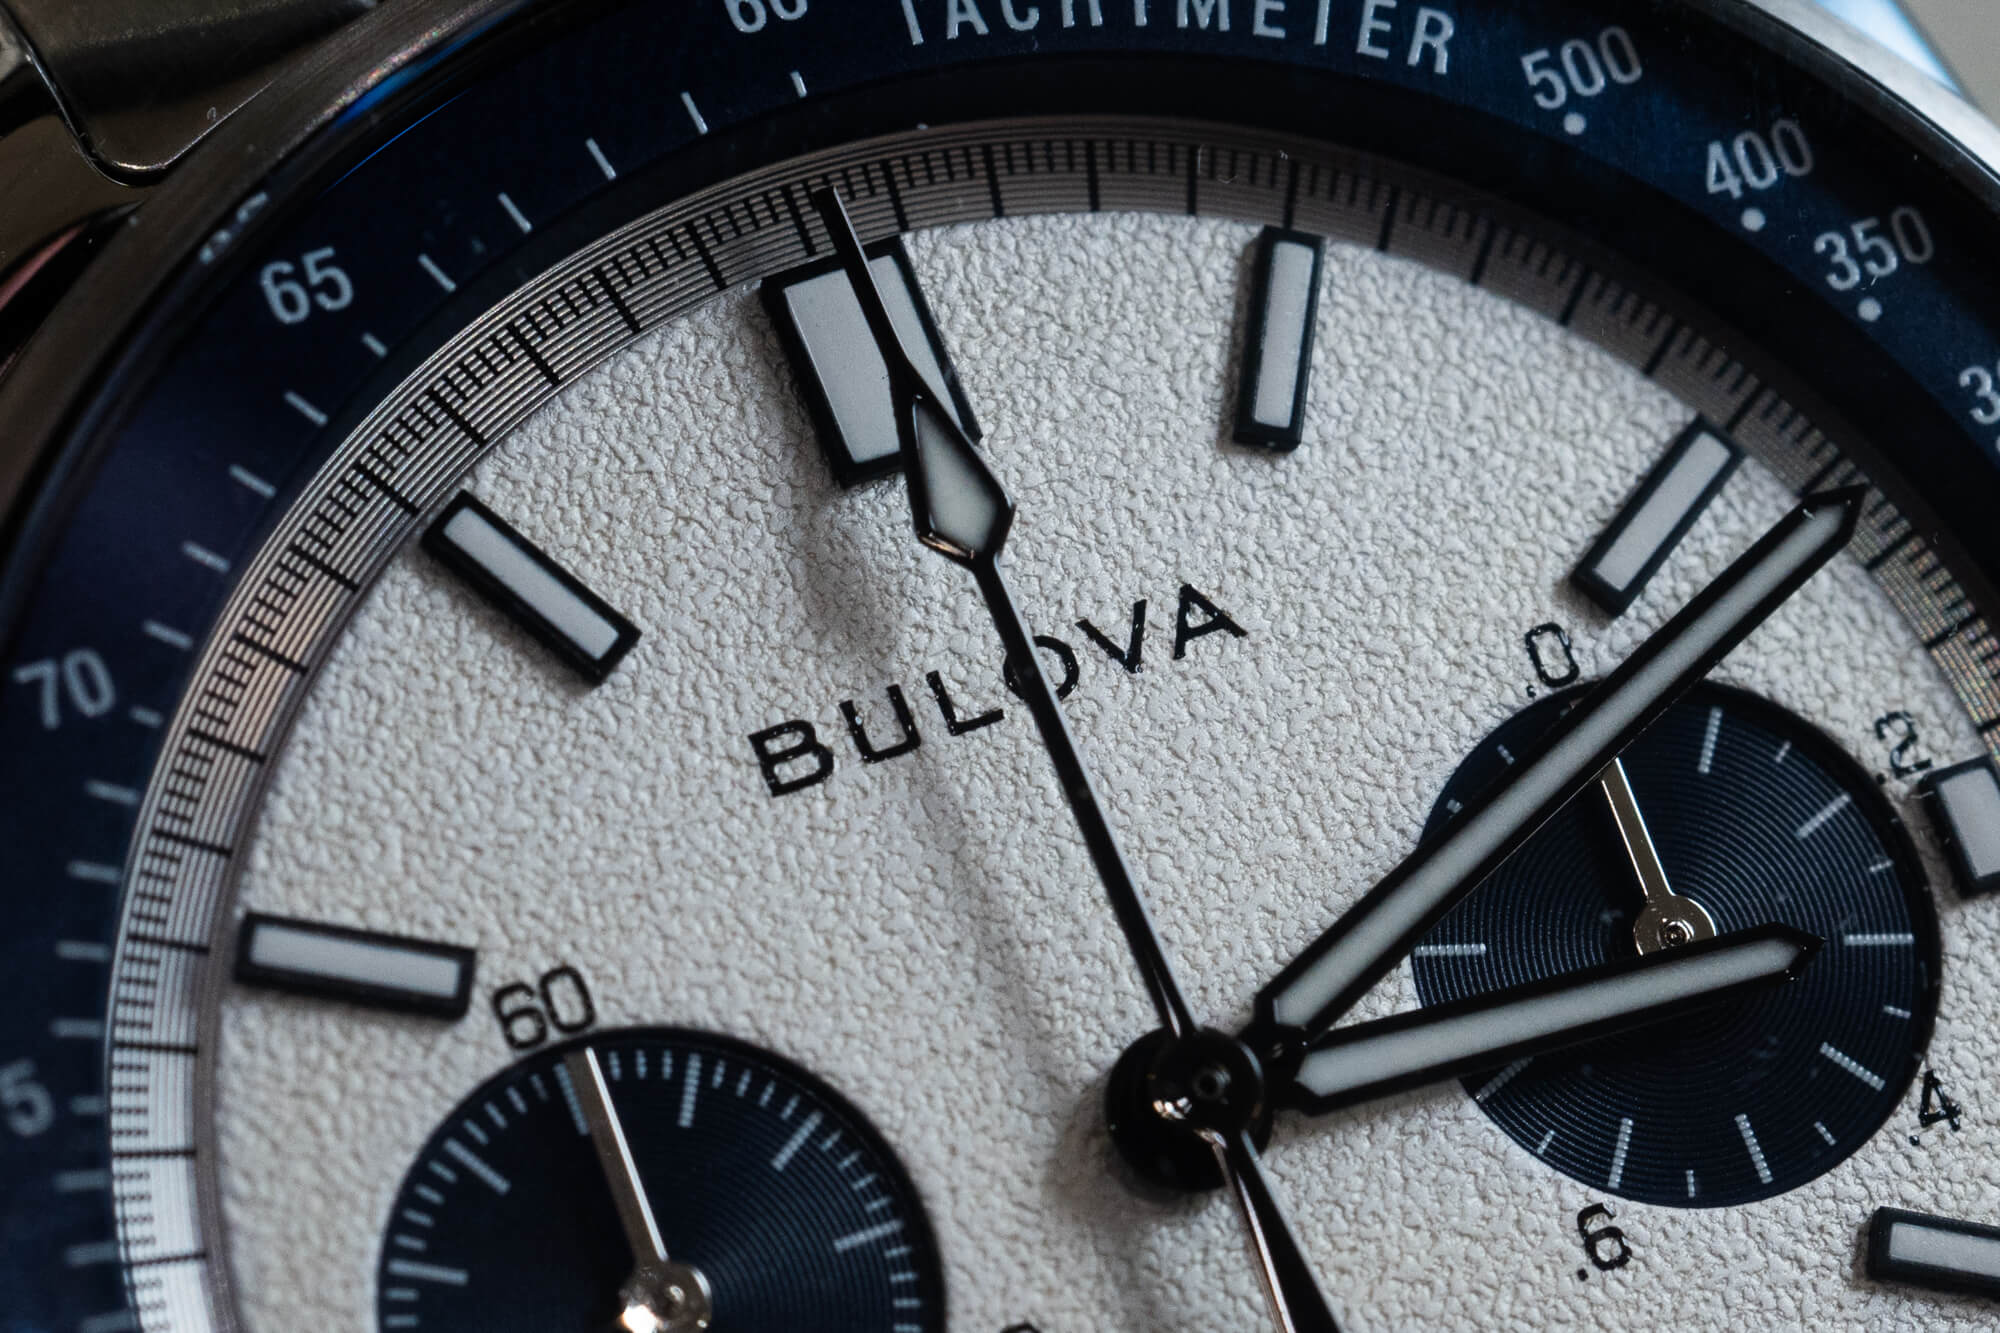 The Bulova Lunar Pilot Chronograph Moon Watch Is on Sale for  Prime  Day 2022